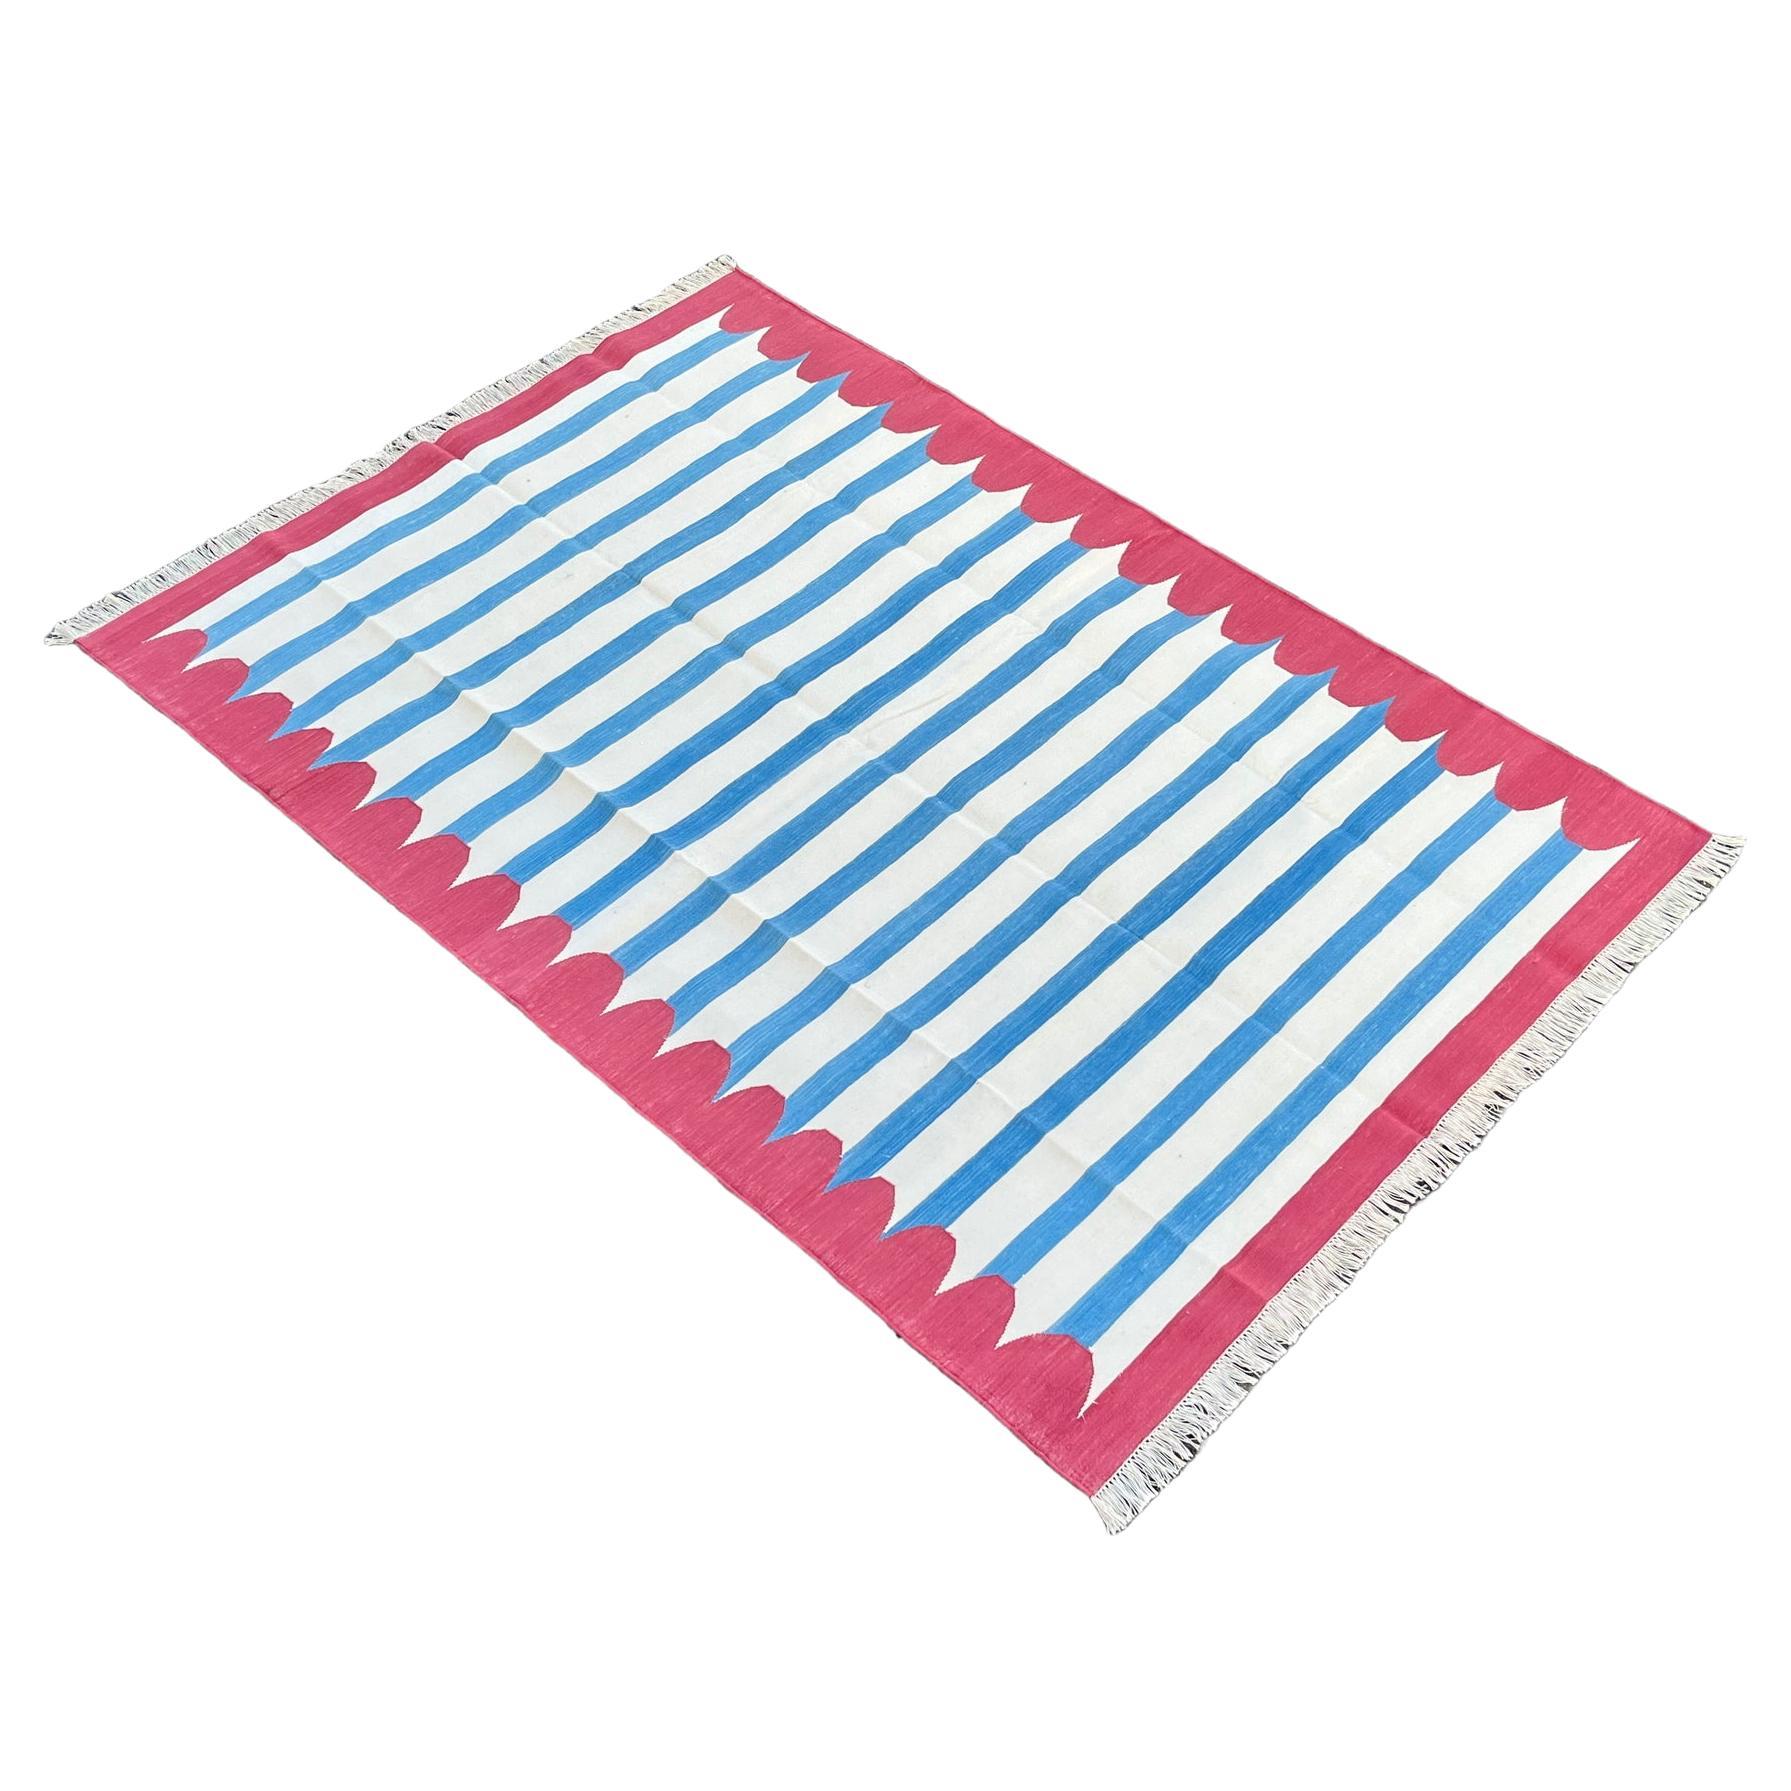 Handmade Cotton Area Flat Weave Rug, 5x7 Blue And Pink Striped Indian Dhurrie For Sale